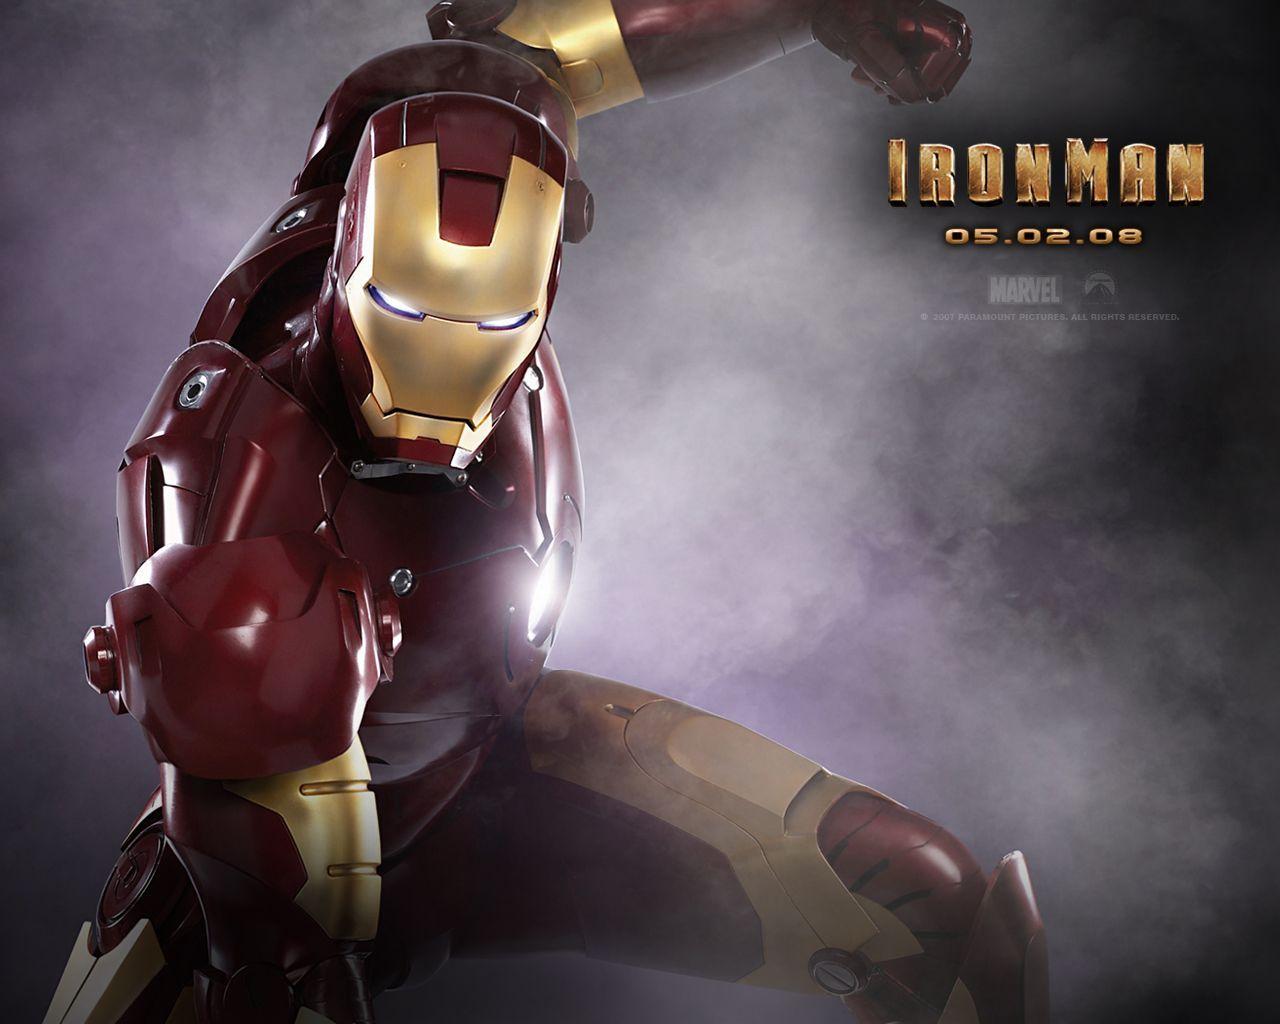 Movies: Iron Man, picture nr. 35579